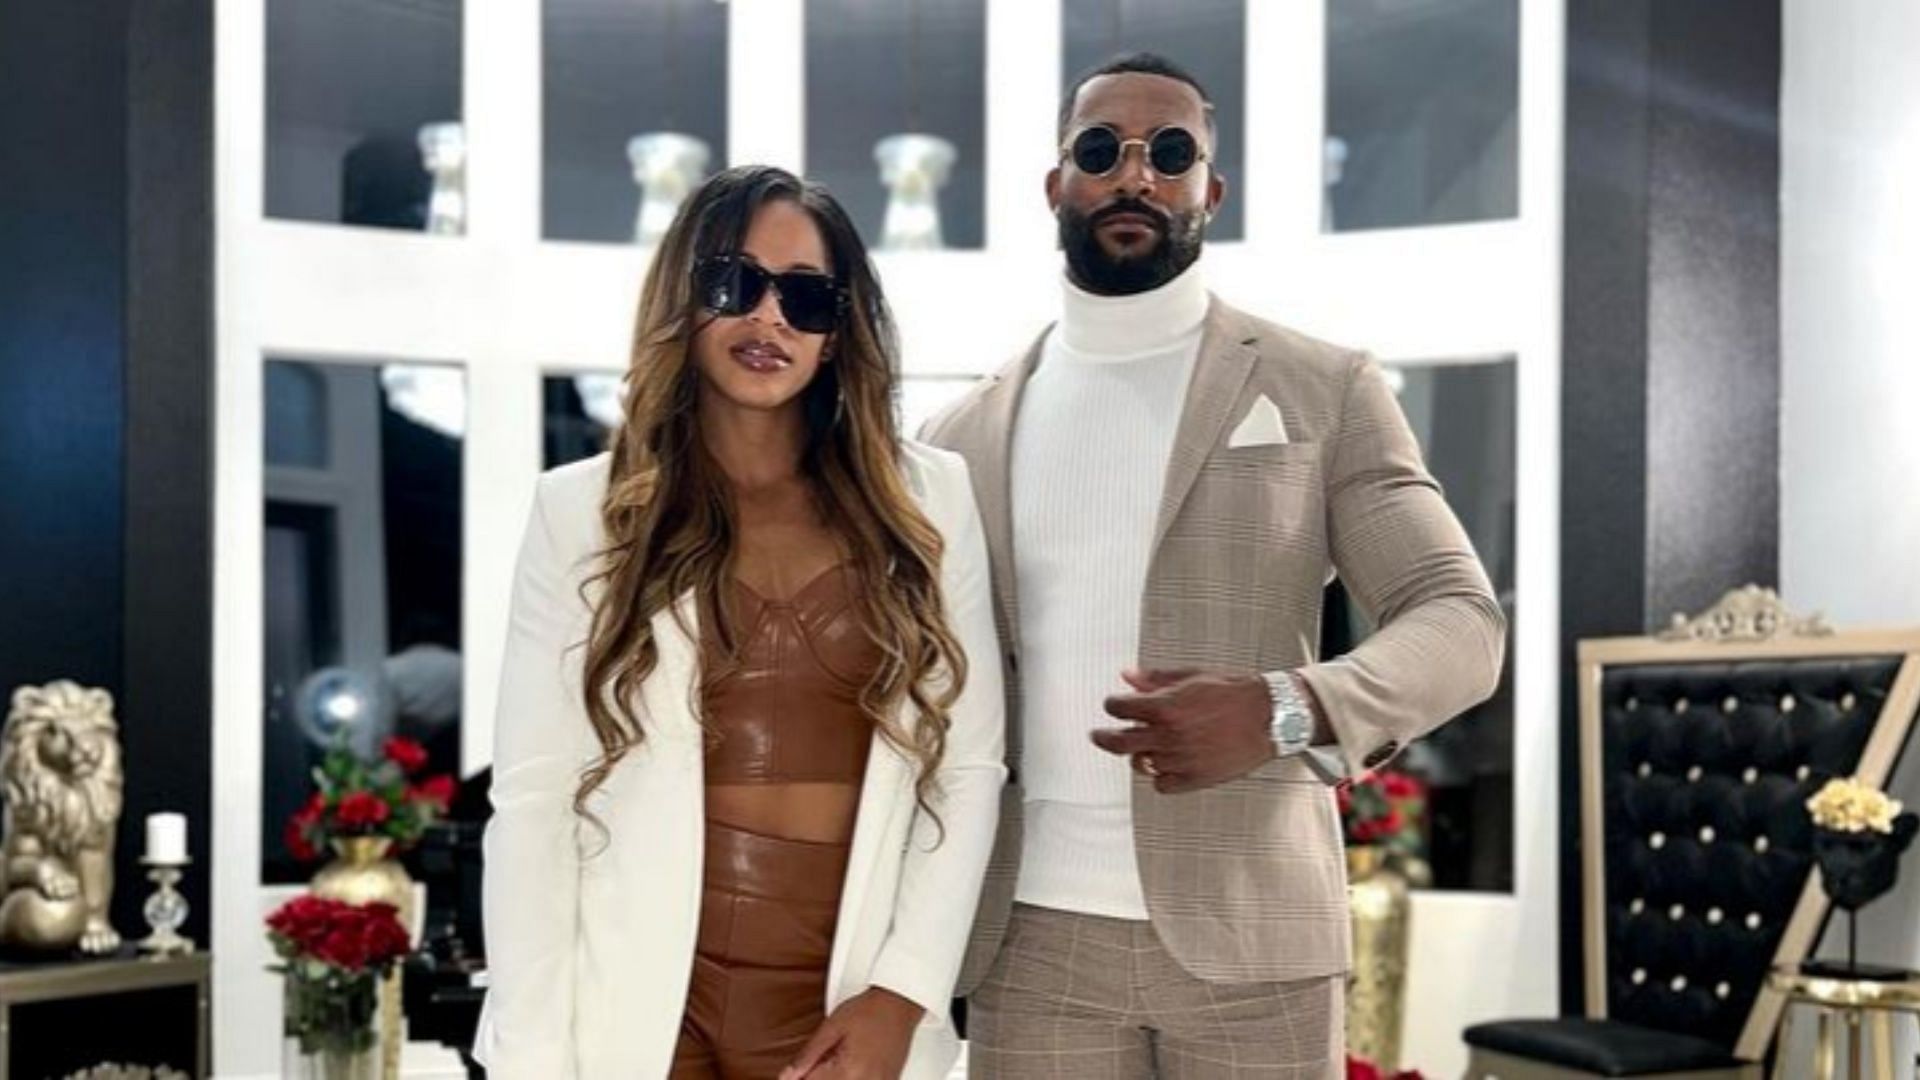 Bianca Belair and Montez Ford are the power couple of WWE.